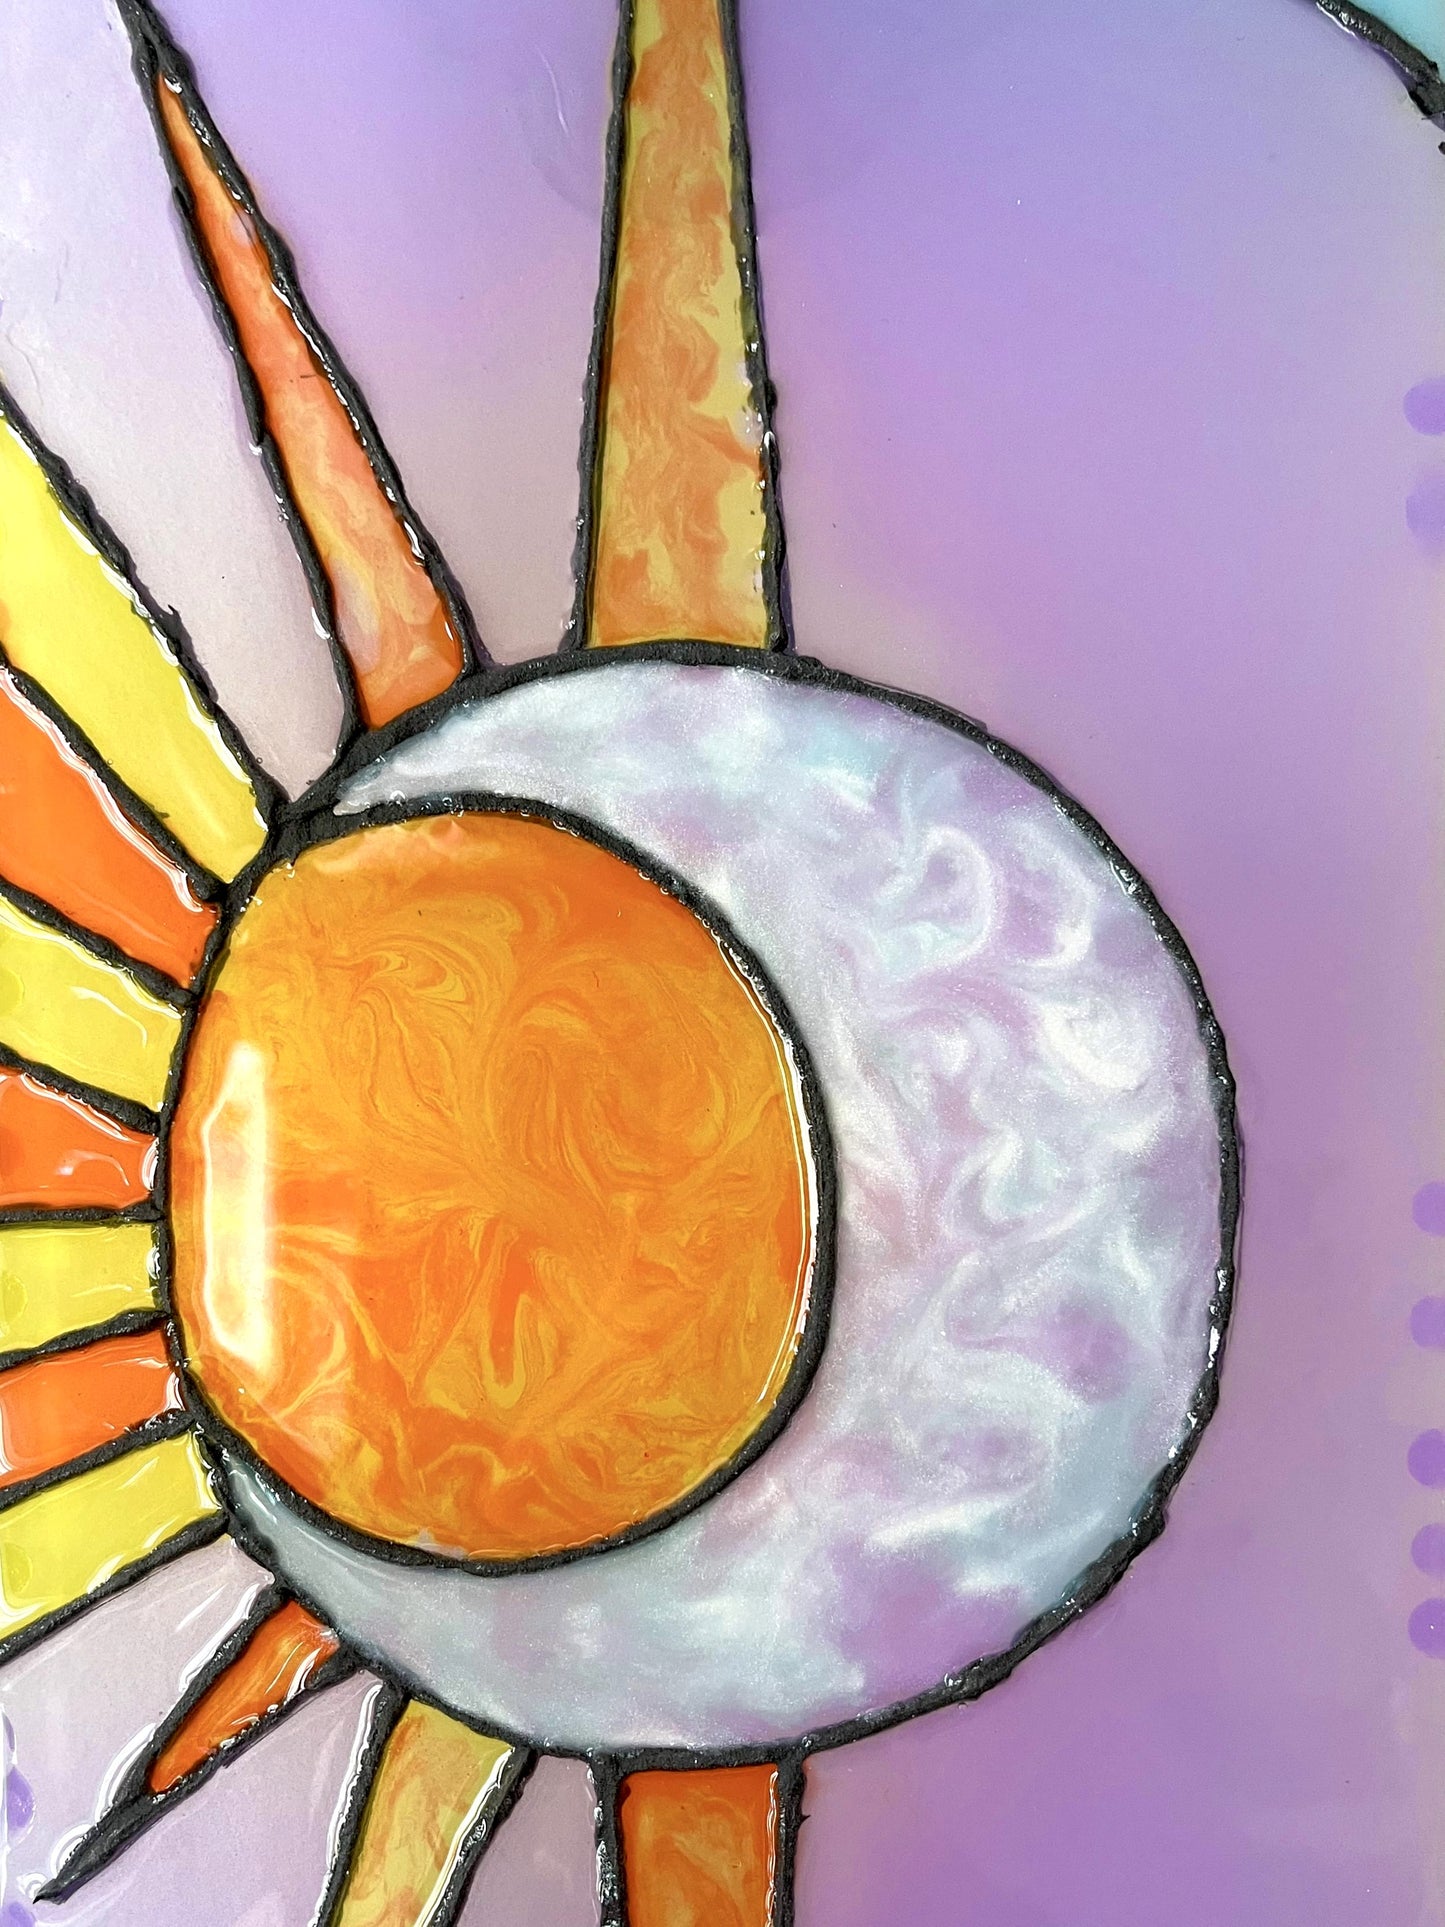 Close up of iridescent sun and moon design with swirling orange and yellow as well as purple, blue, and pearl resins.